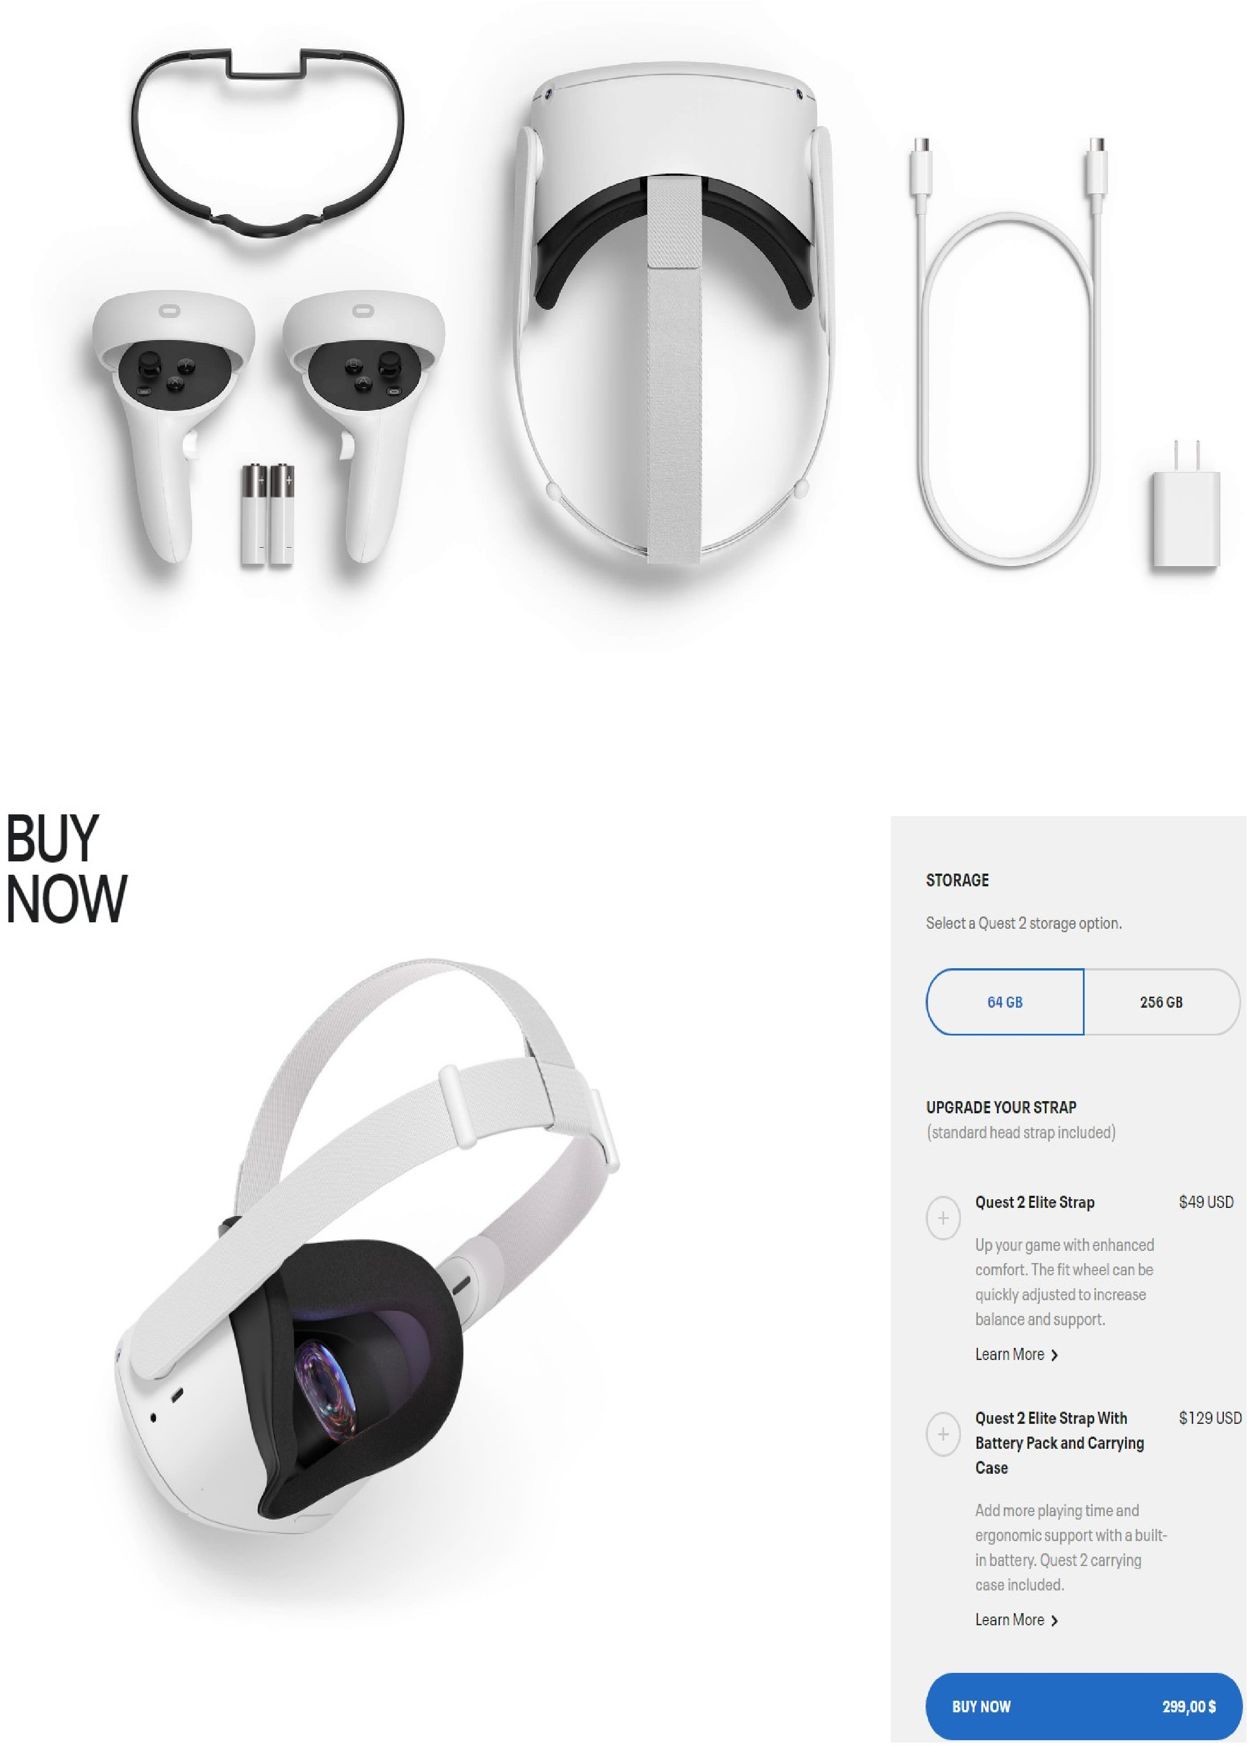 Catalogue Oculus Black Friday 2020 from 11/13/2020